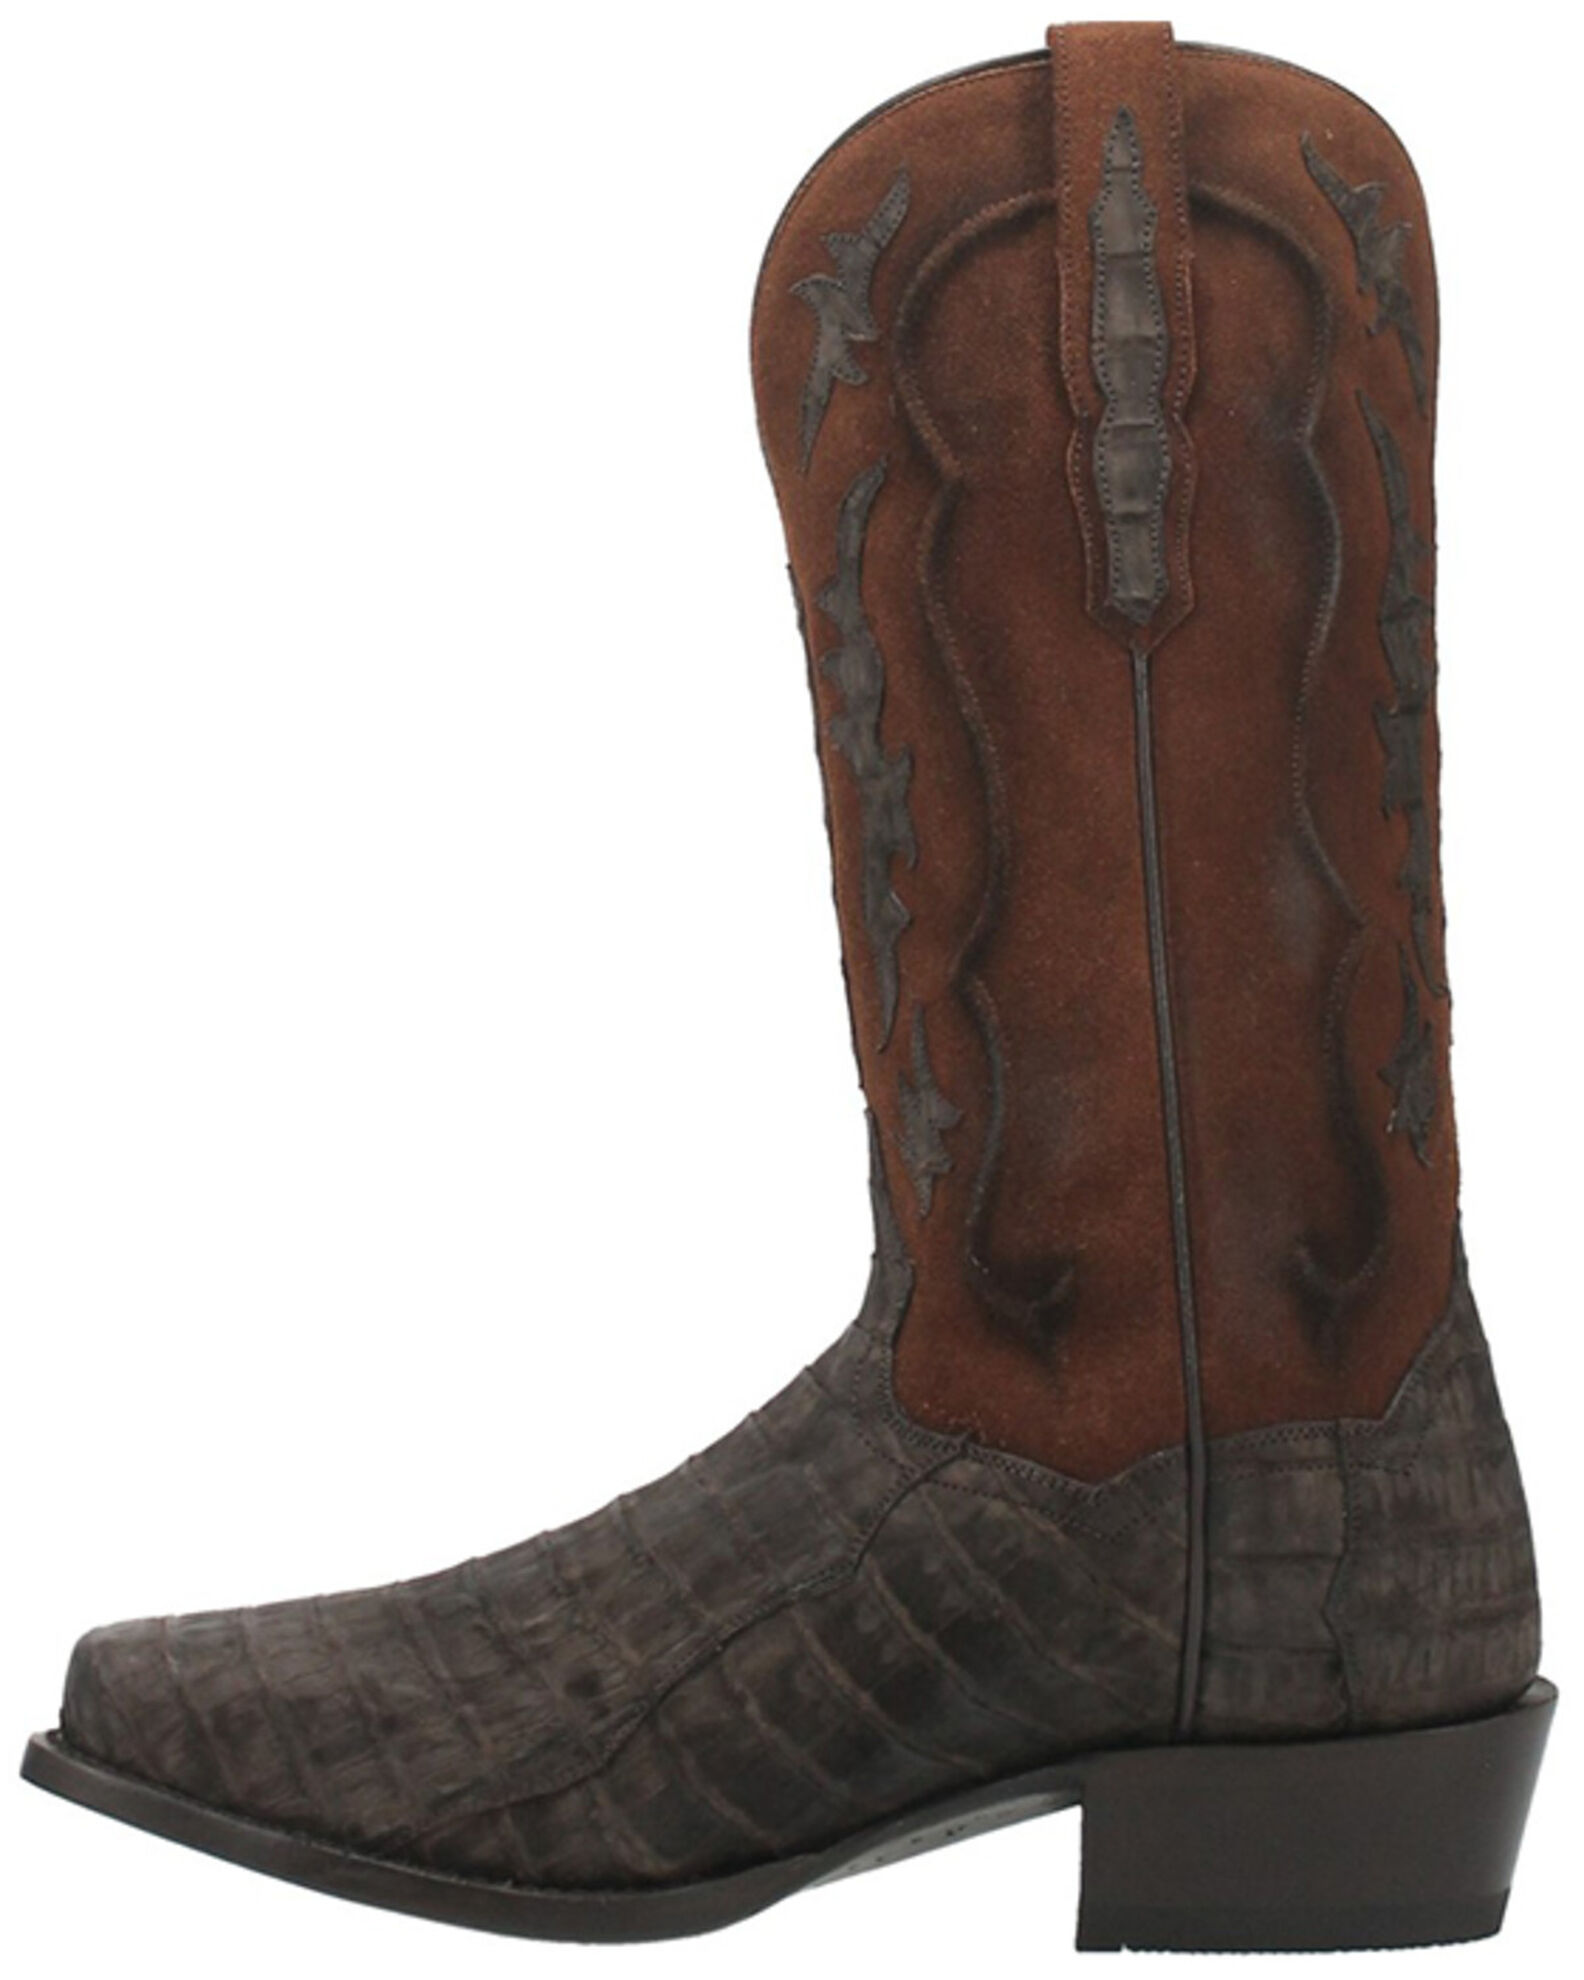 Product Name: Dan Post Men's Socrates Exotic Caiman Tall Western Boots ...